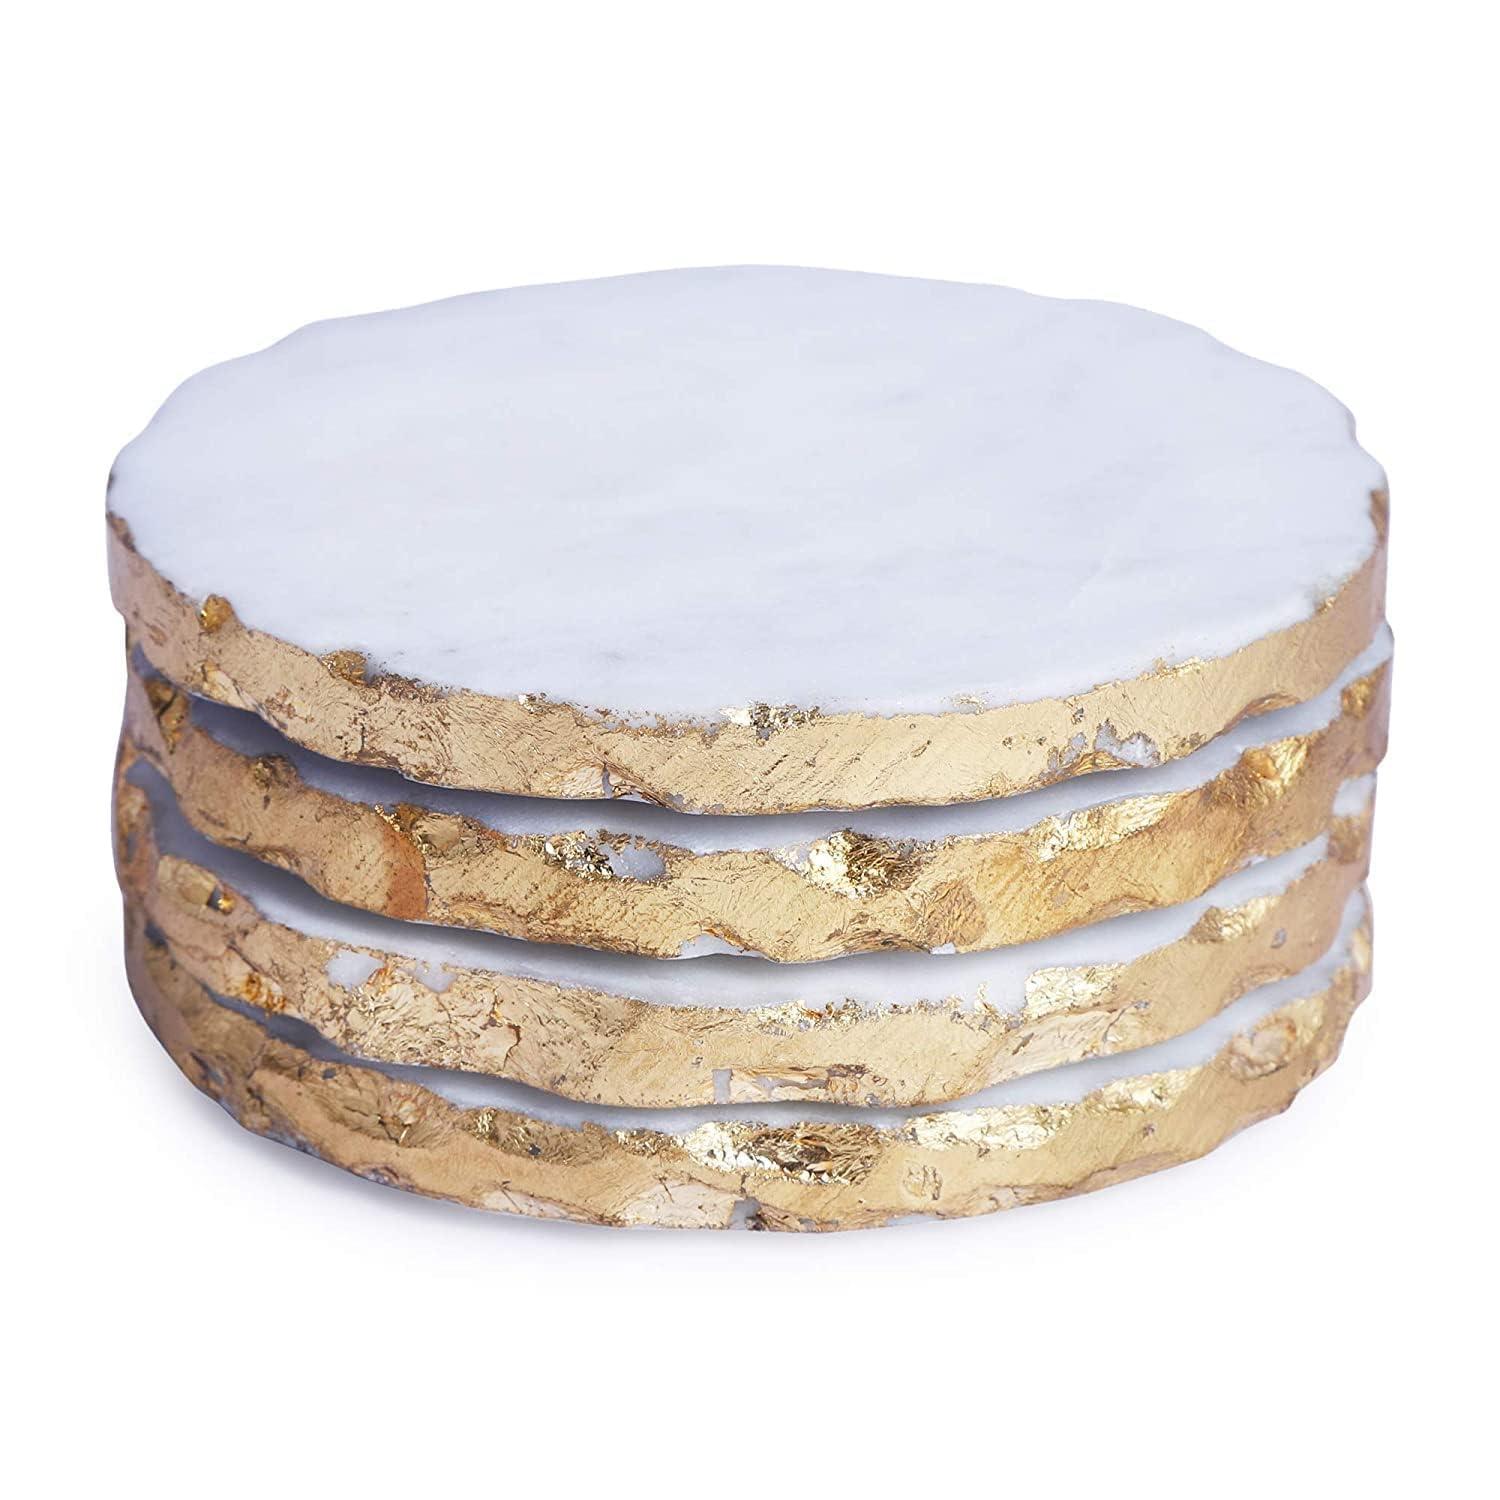 MBSC White Marble Tea/Coffee/Cocktail Round Coaster (with Rough Edges Covered with Gold foil) Set of 4 pcs for Drinks Hot & Cold, Table Decorative Cocktail Coaster